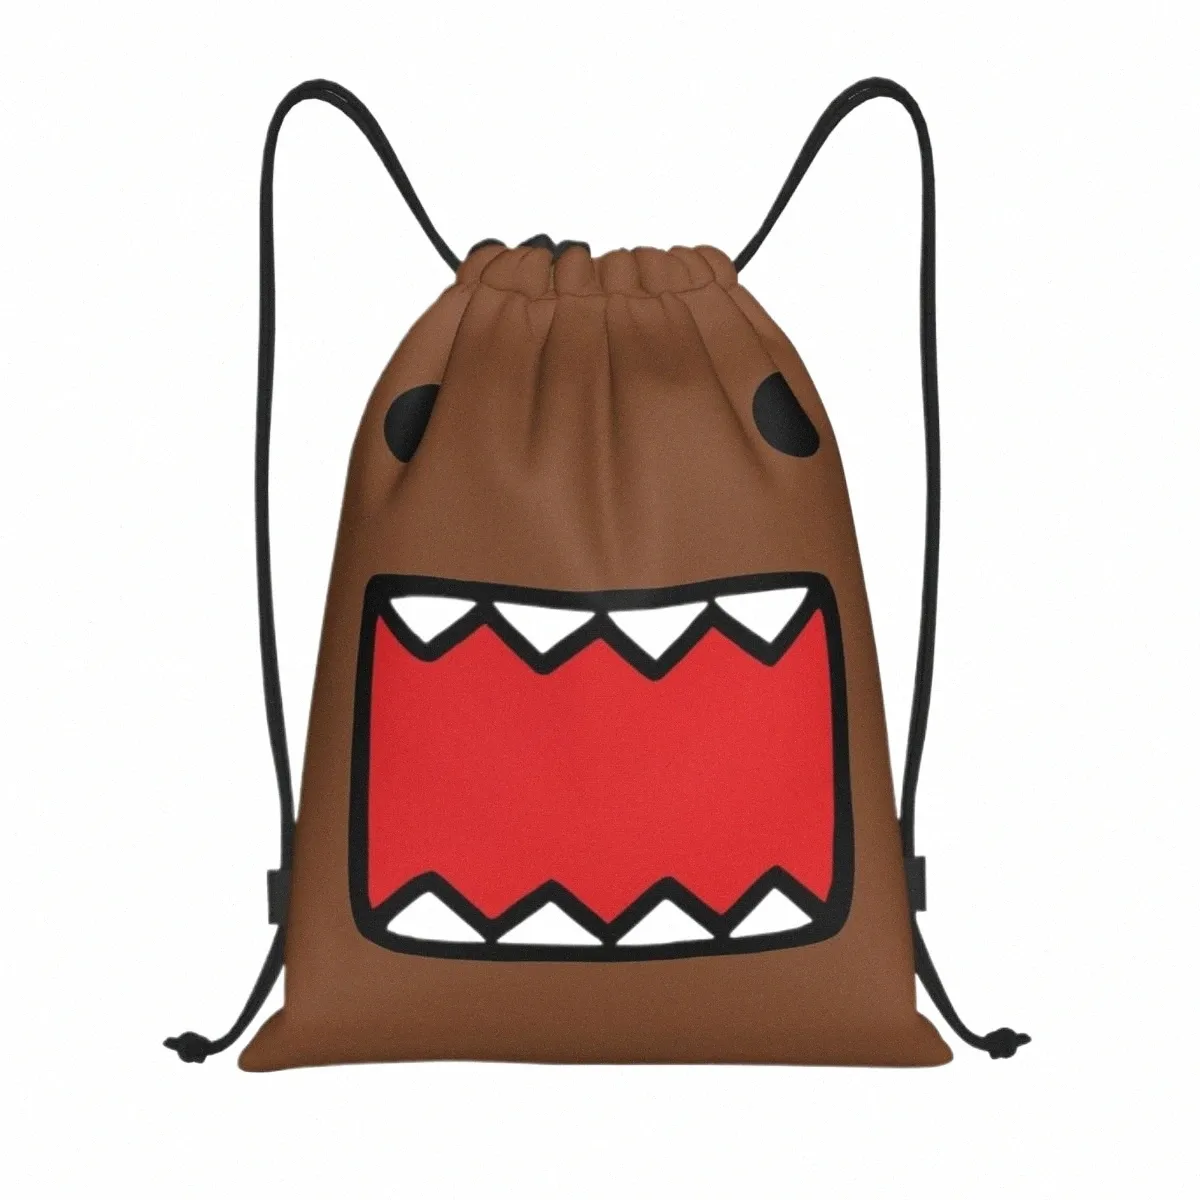 domo Kun Drawstring Backpack Sports Gym Sackpack String Bags for Exercise K4a0#